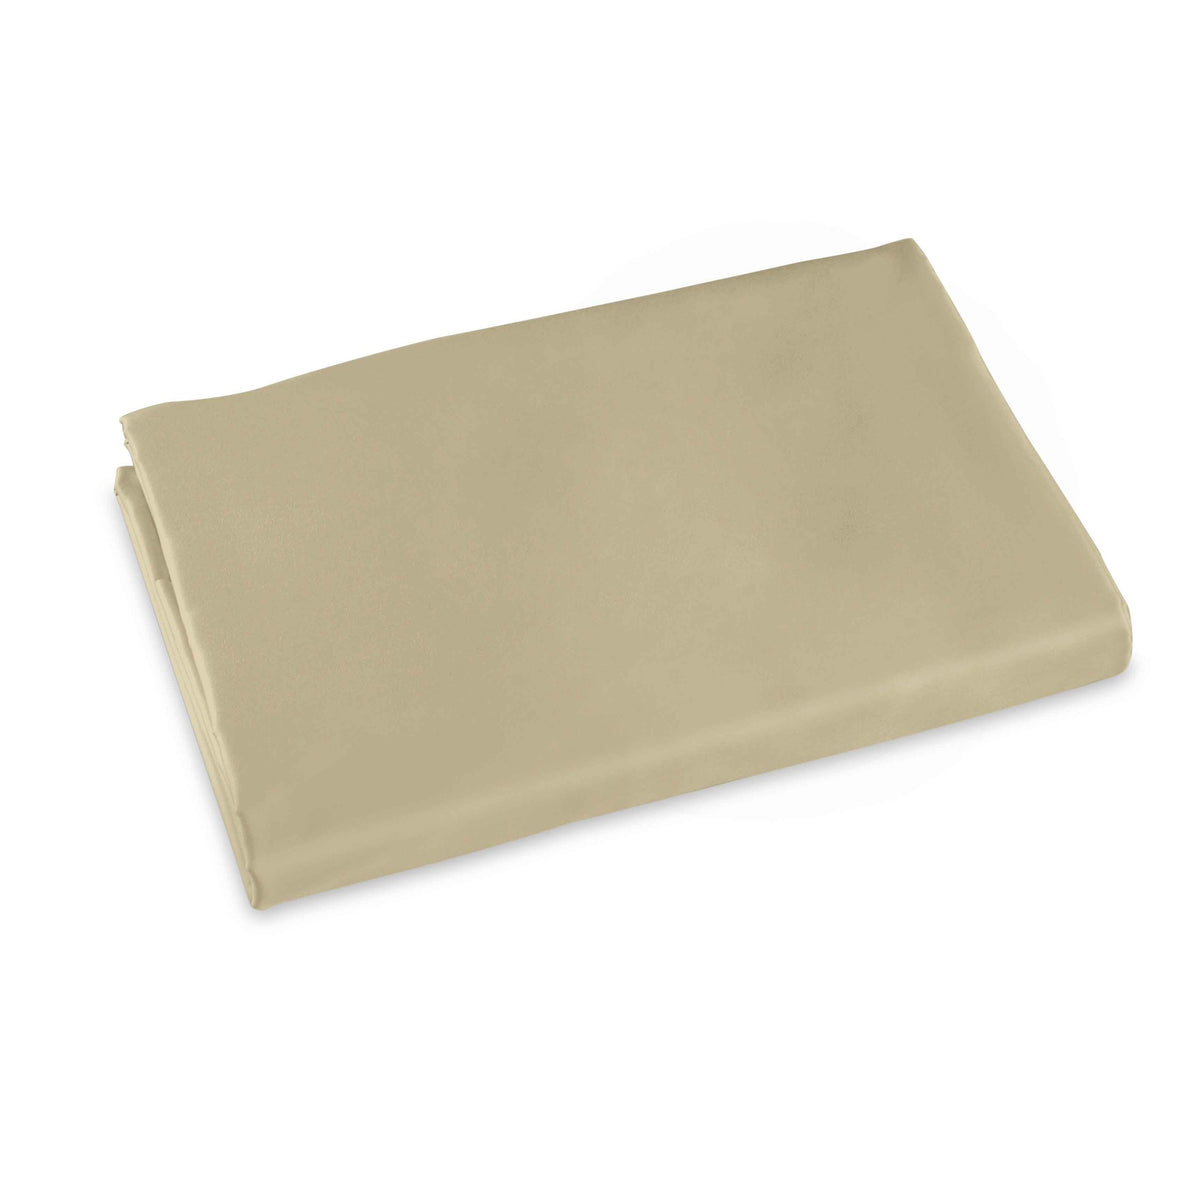 Clear Image of Signoria Raffaello Fitted Sheet in Taupe Color